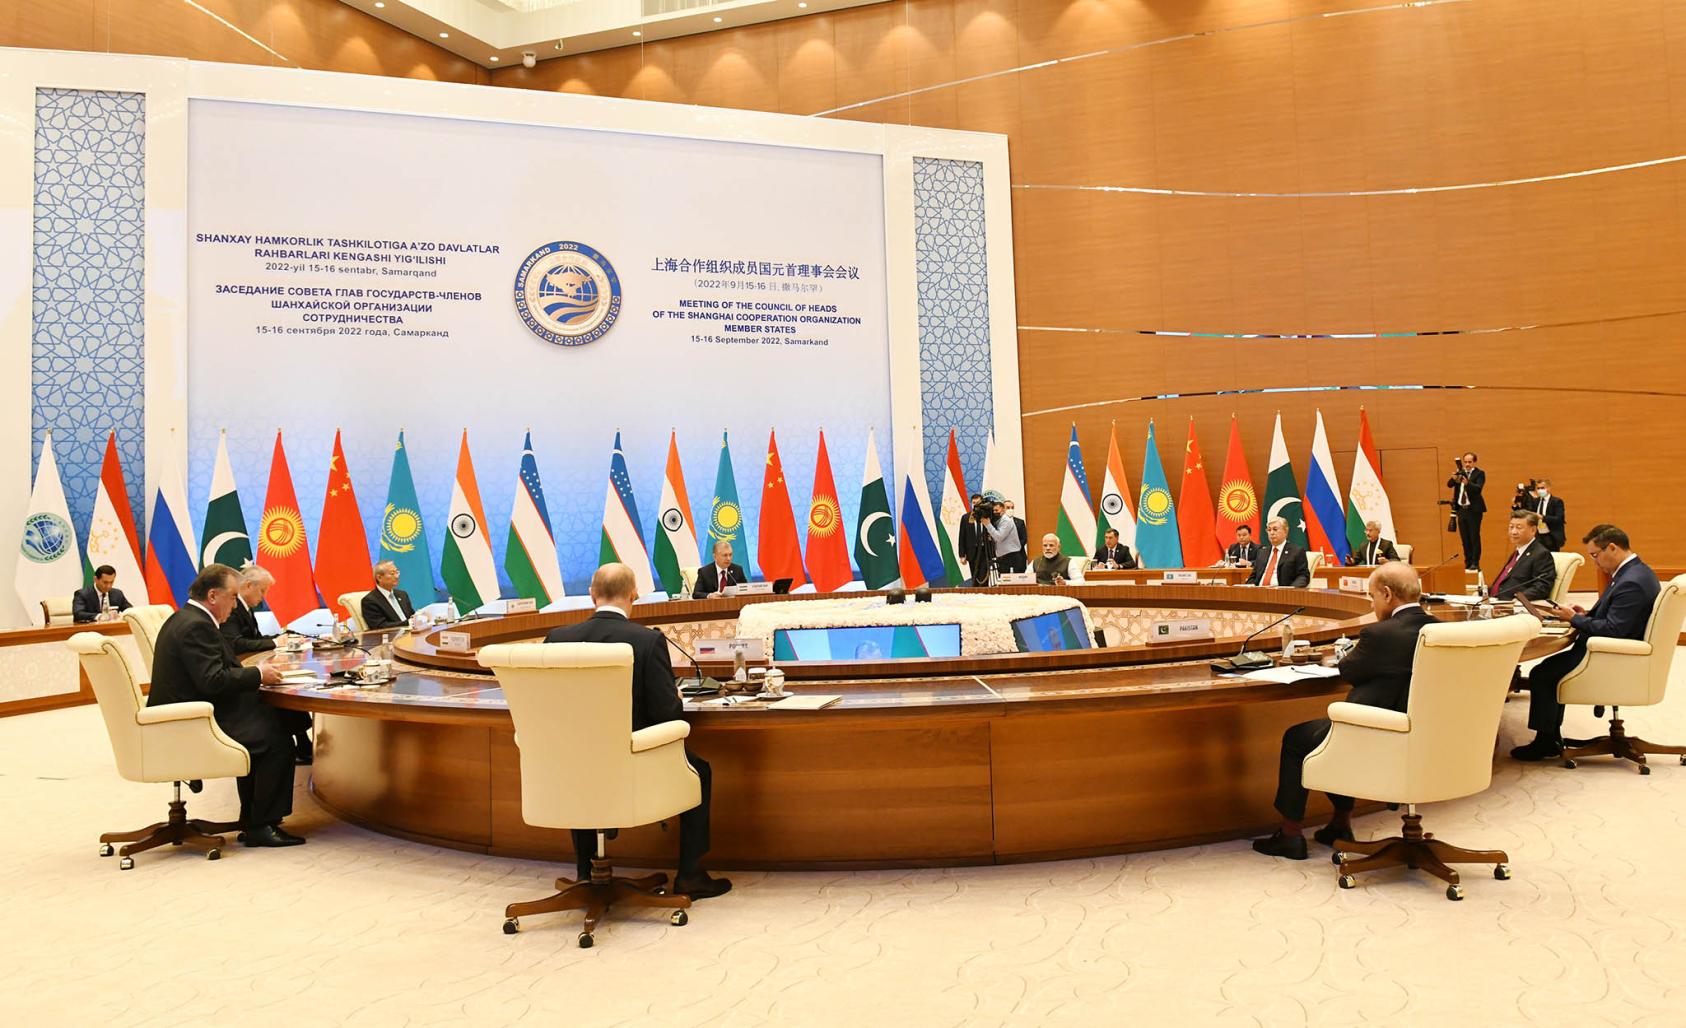 Heads of state from Shanghai Cooperation Organization member states meet in Samarkand, Uzbekistan. September 16, 2022. (India Ministry of External Affairs/Flickr)